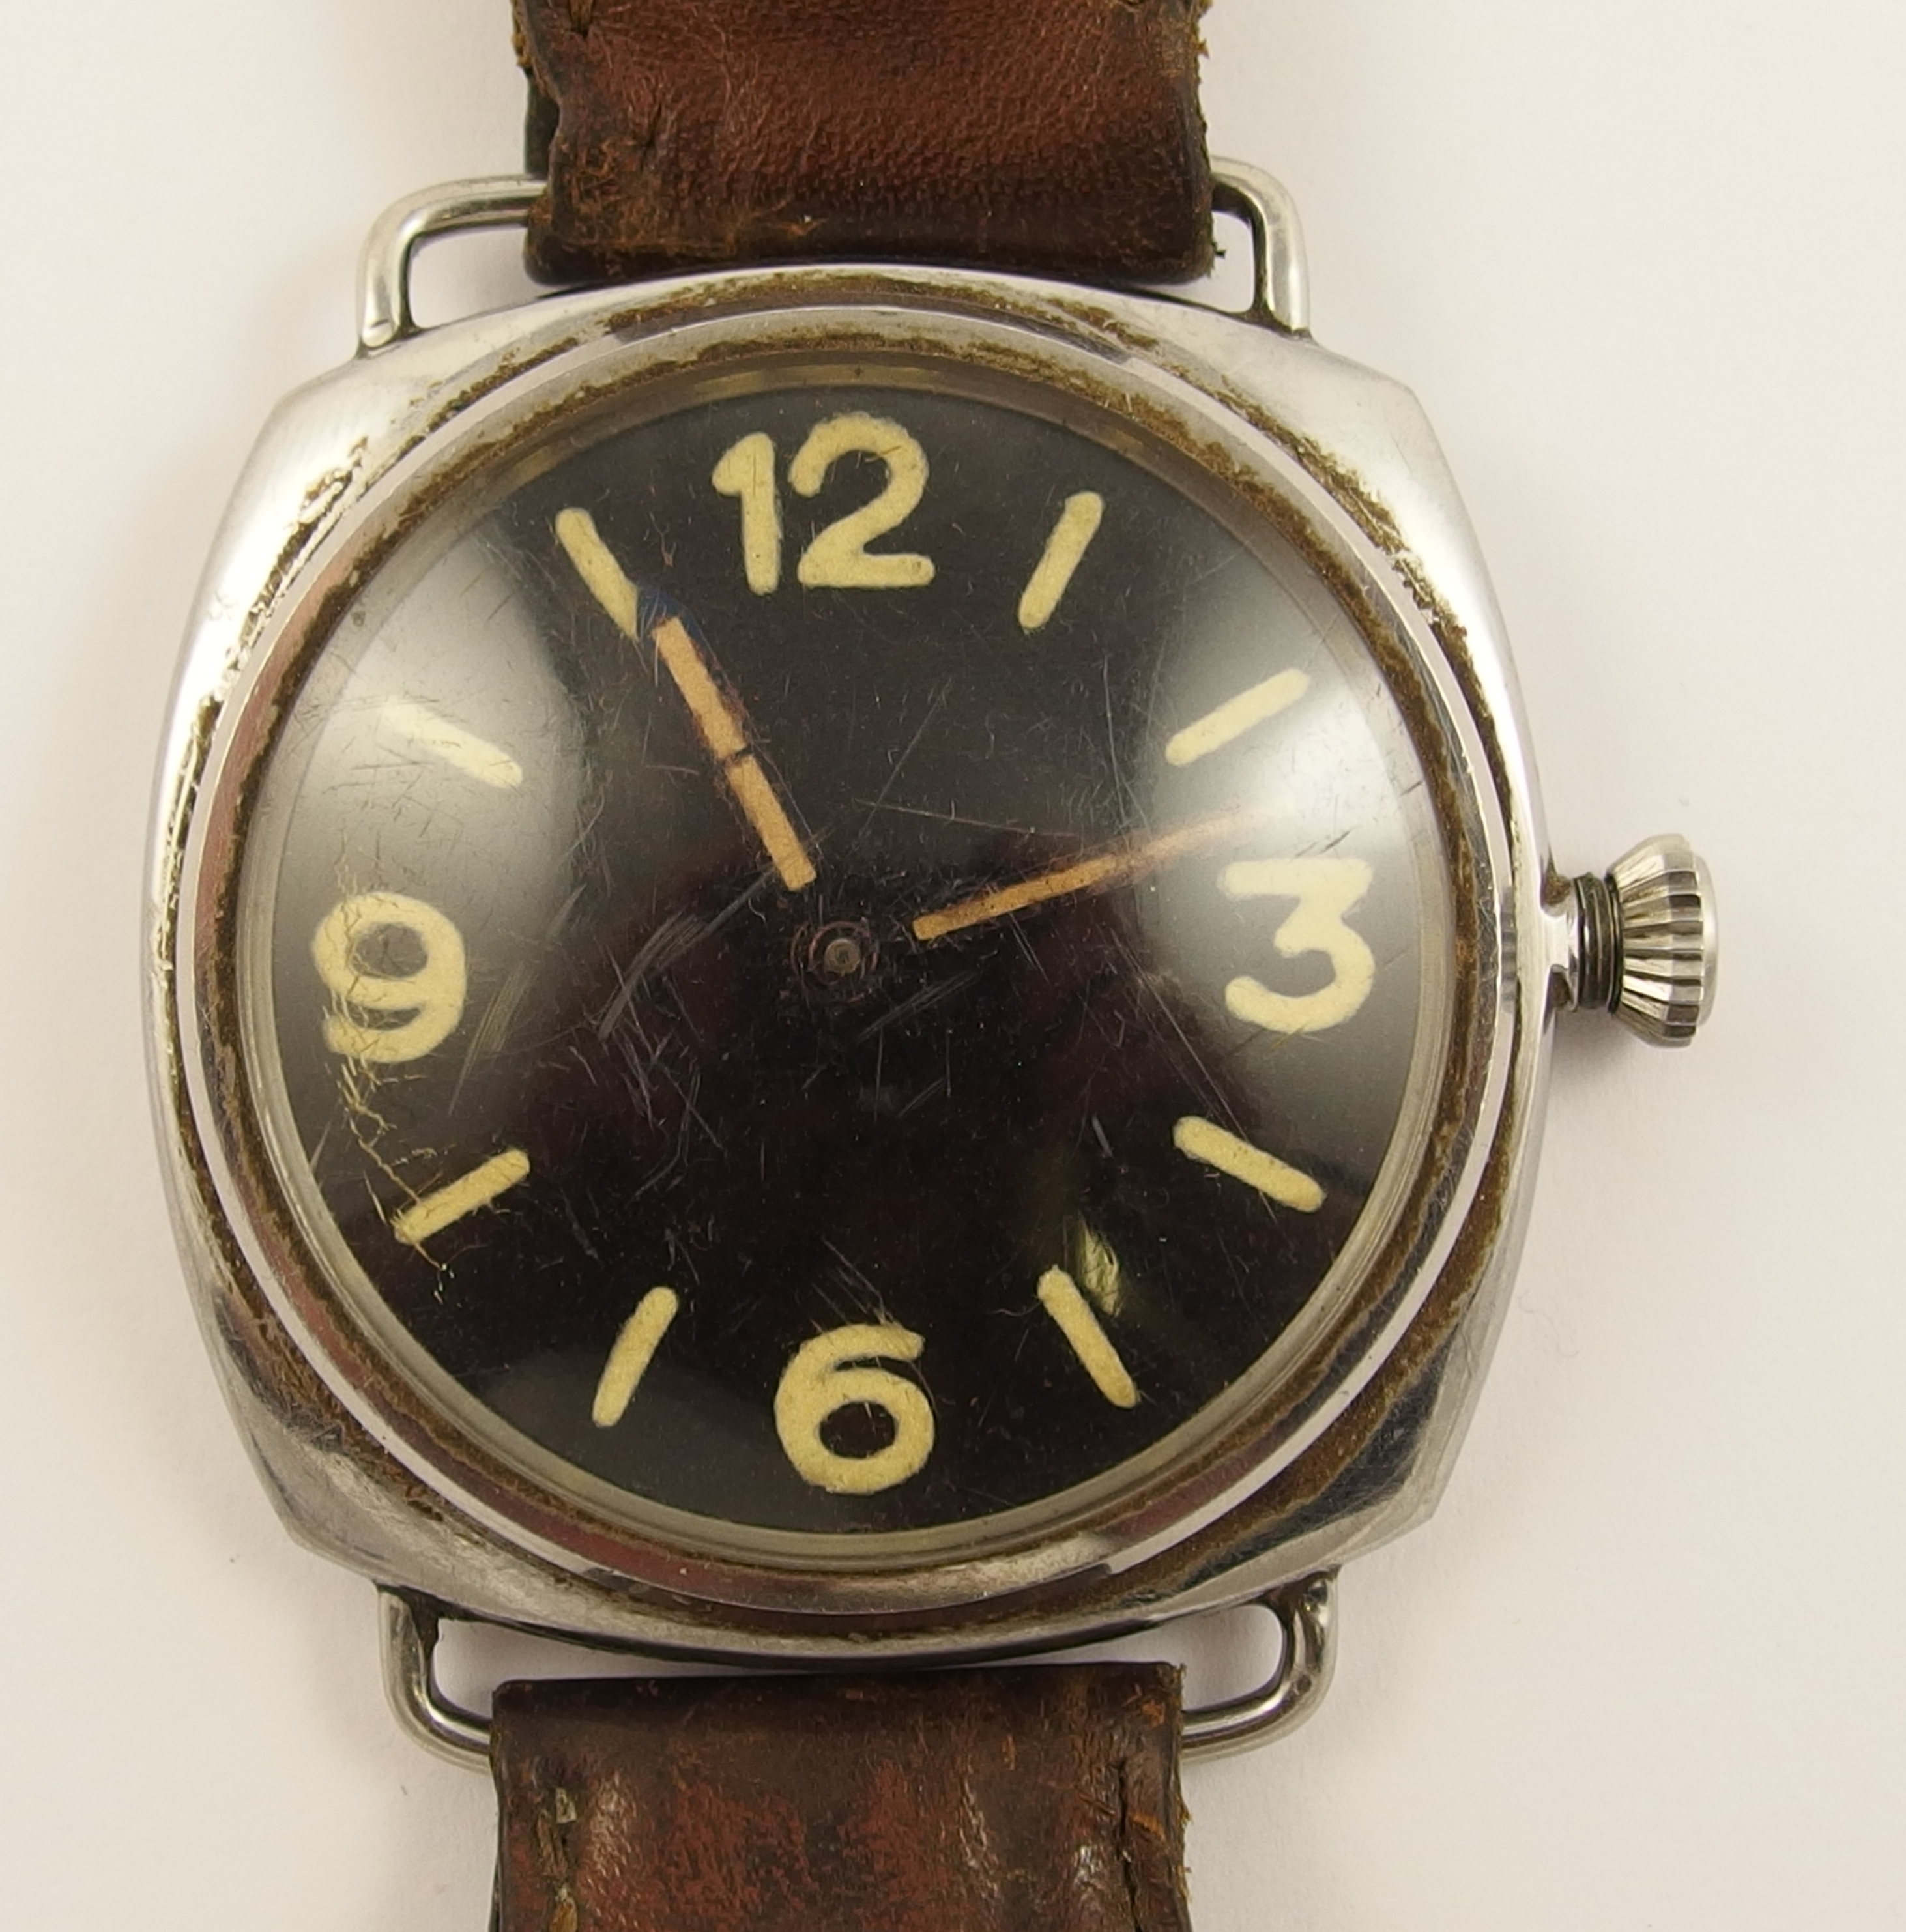 A Panerai Type D Model 3646 Military Wristwatch with Rolex 17 Rubis movement with domed perspex - Image 2 of 6